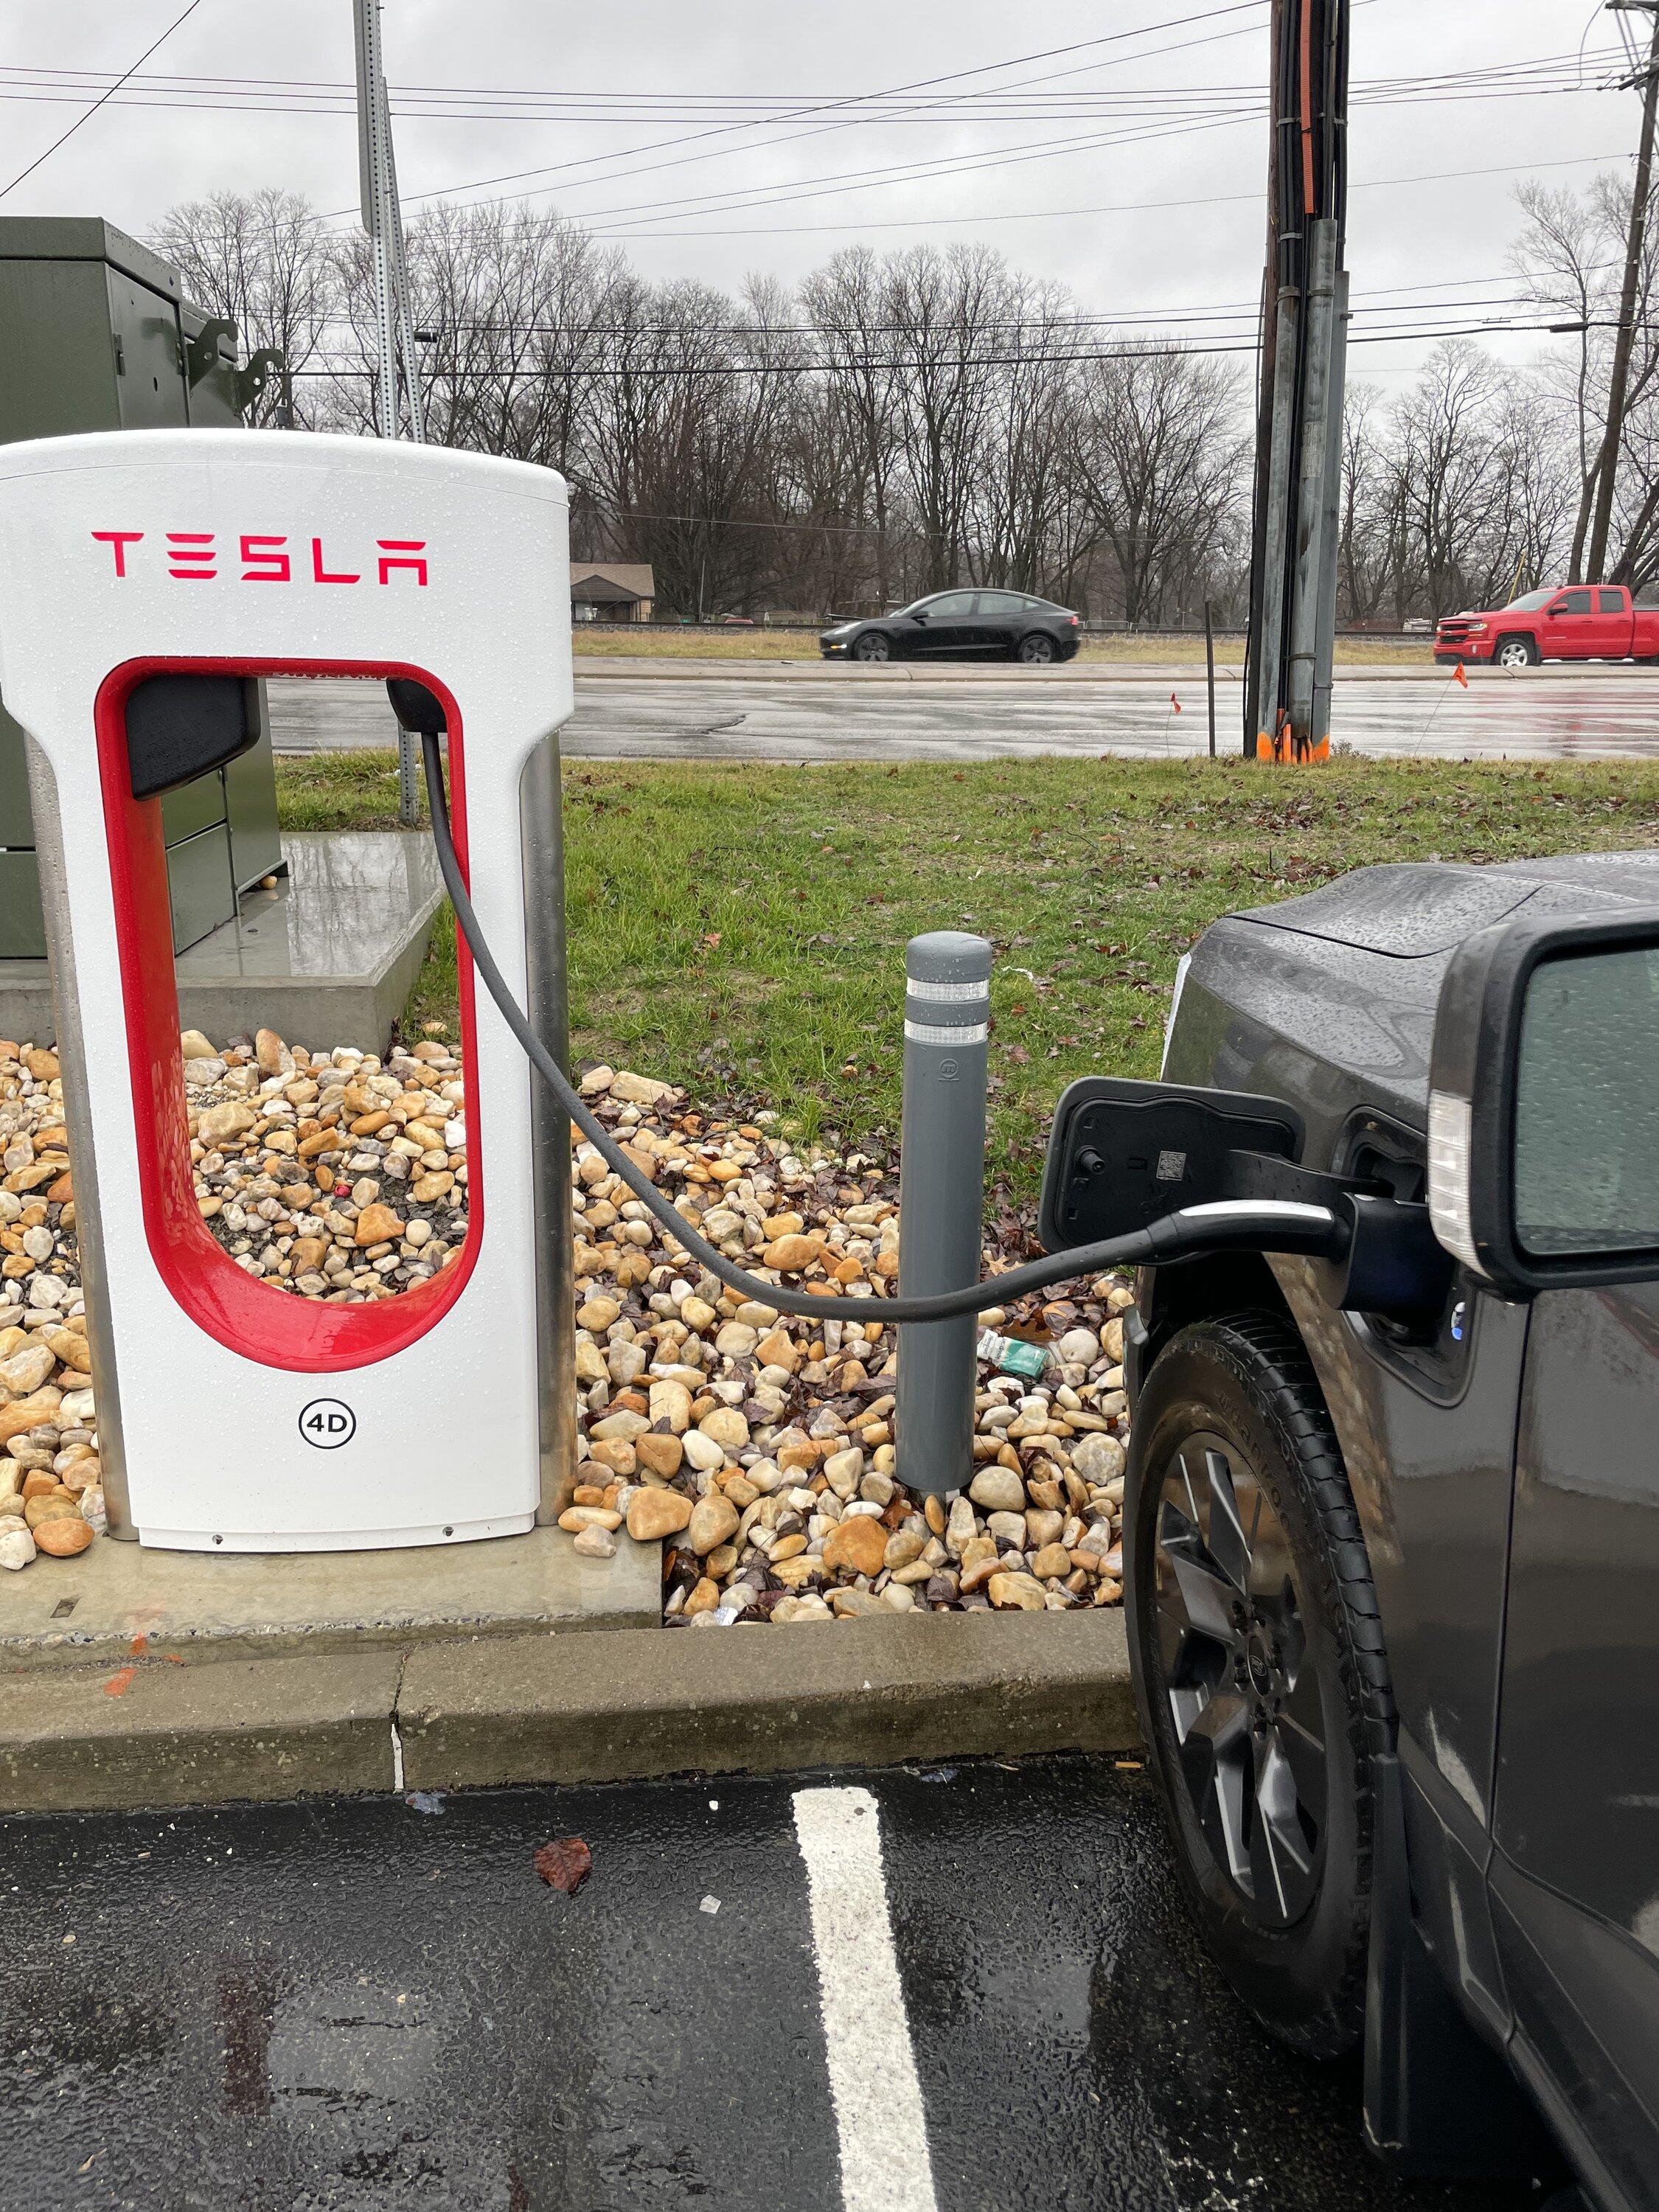 Ford F-150 Lightning Tesla Supercharger network now up to 66 locations with Magic Dock (4/17/24) IMG_1551